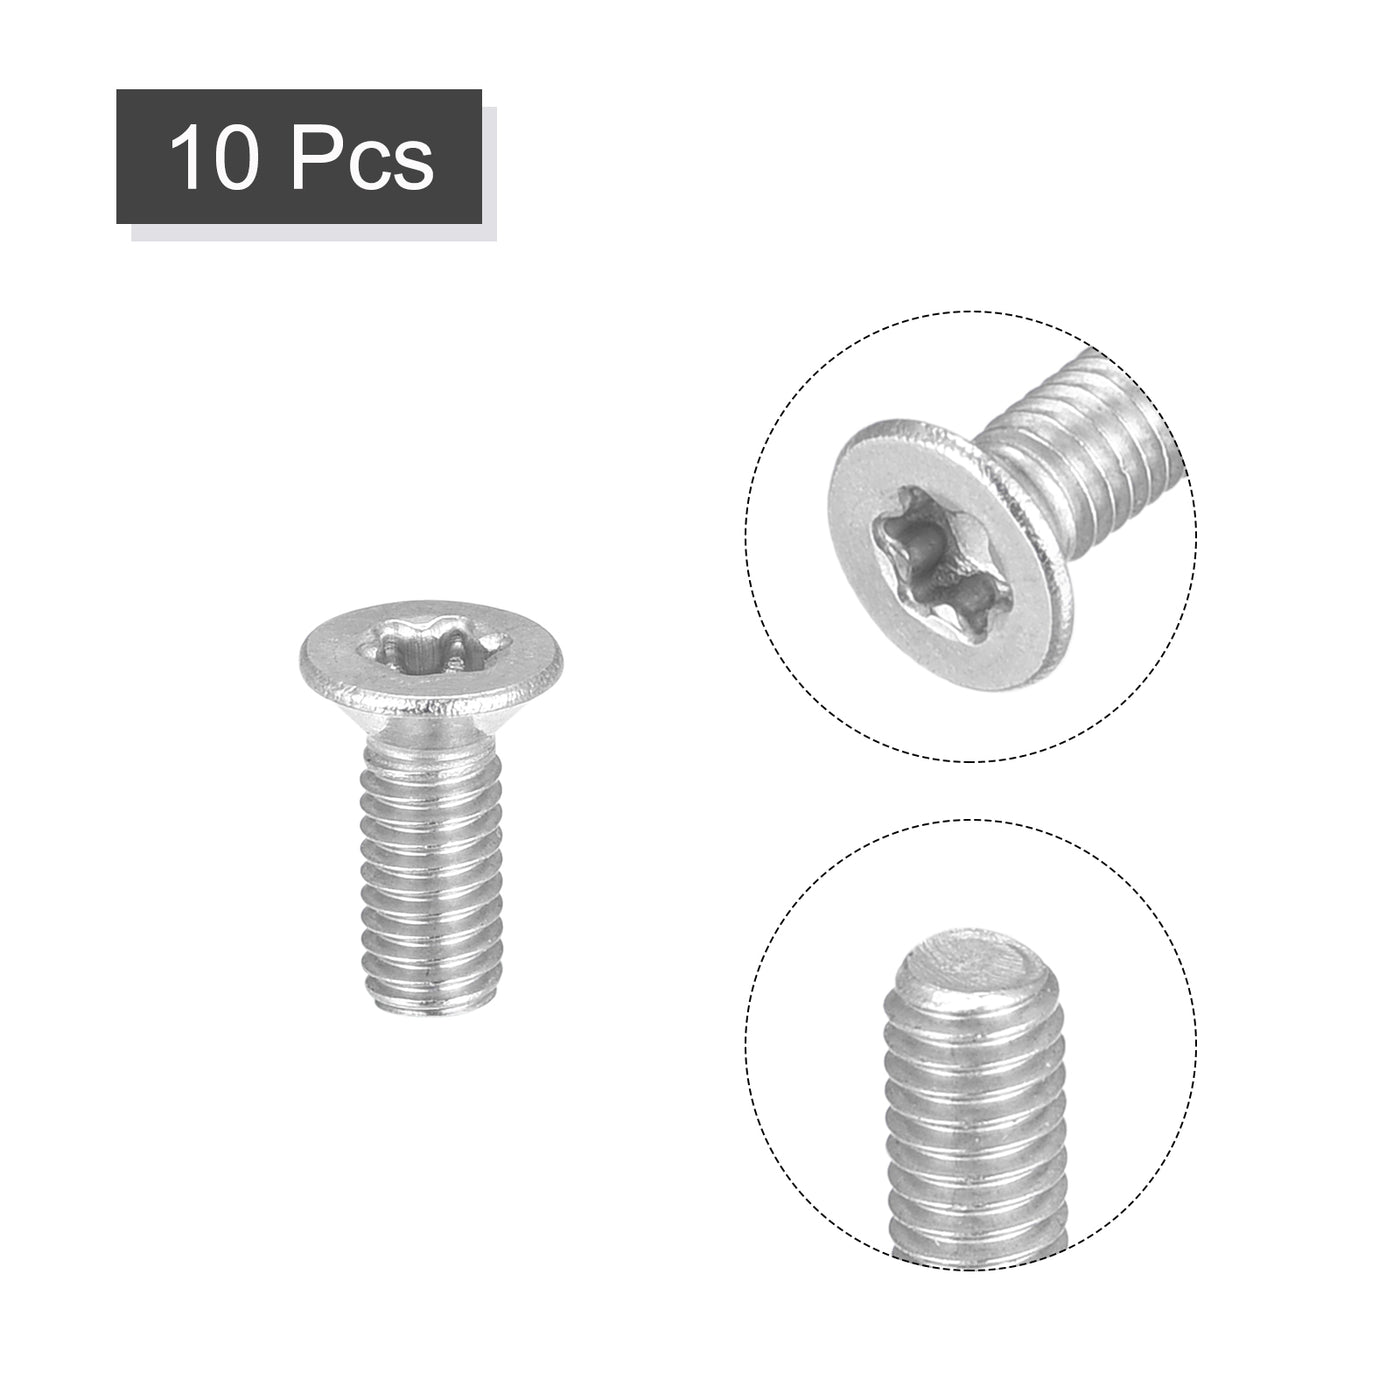 uxcell Uxcell M3x8mm Torx Security Screws, 10pcs 316 Stainless Steel Countersunk Head Screw